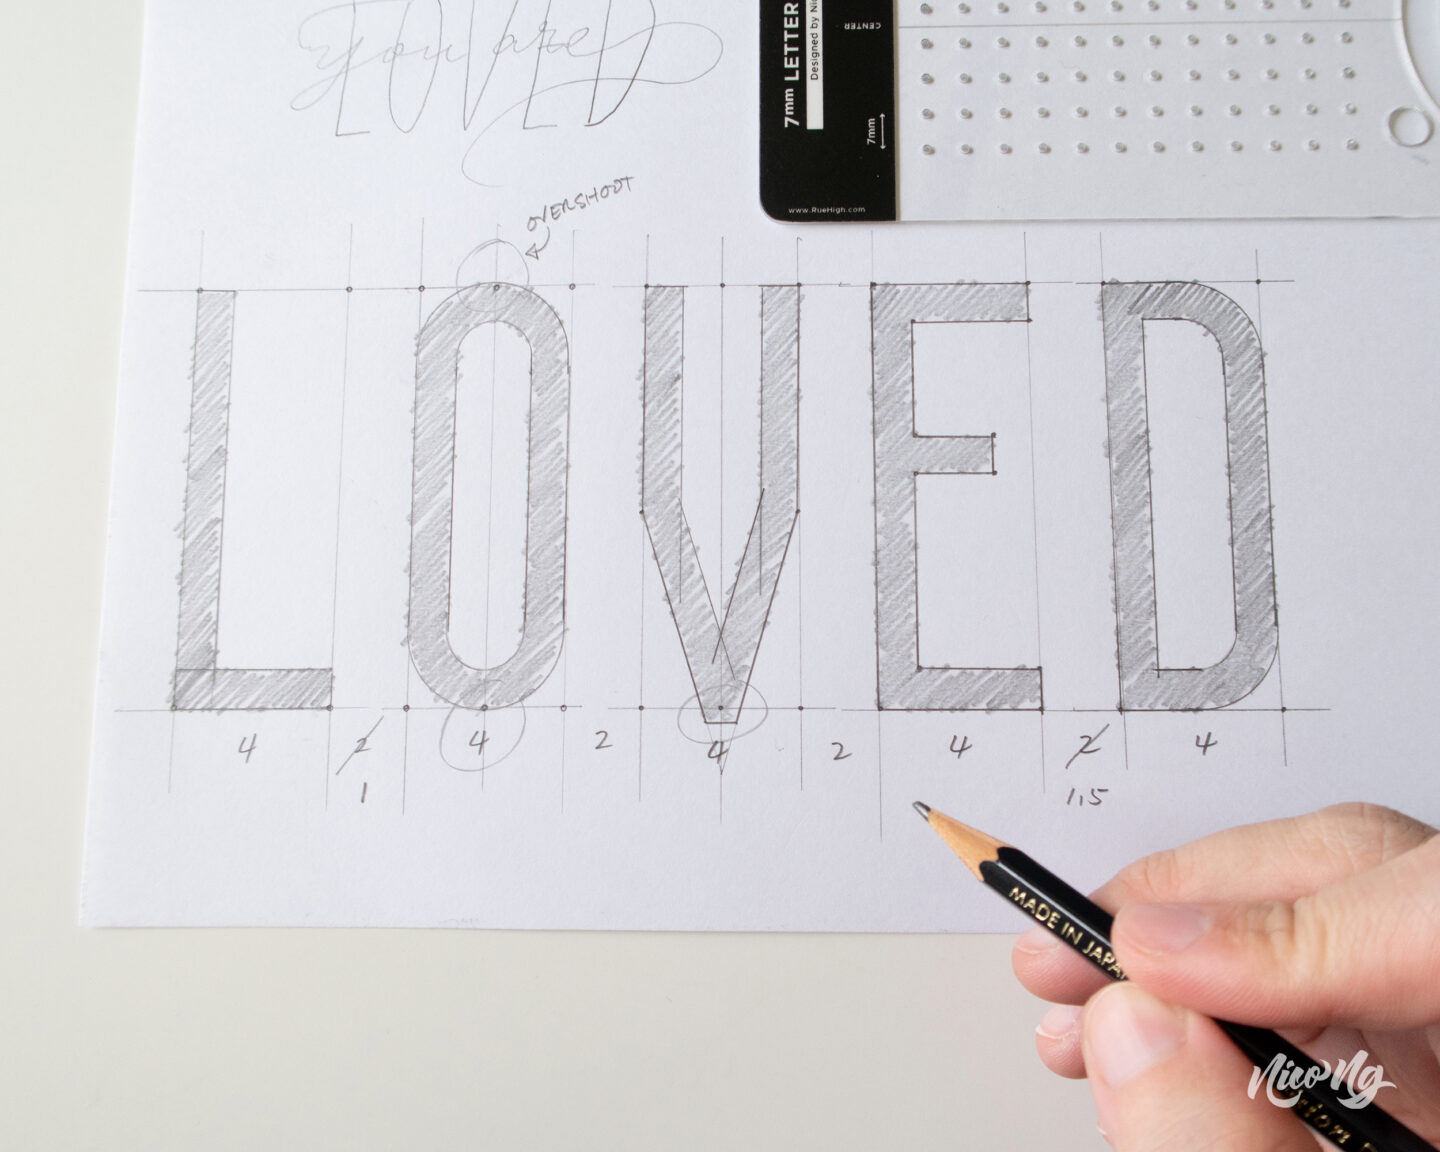 Intertwined Script and Block Lettering Tutorial (Part I) by Nico Ng